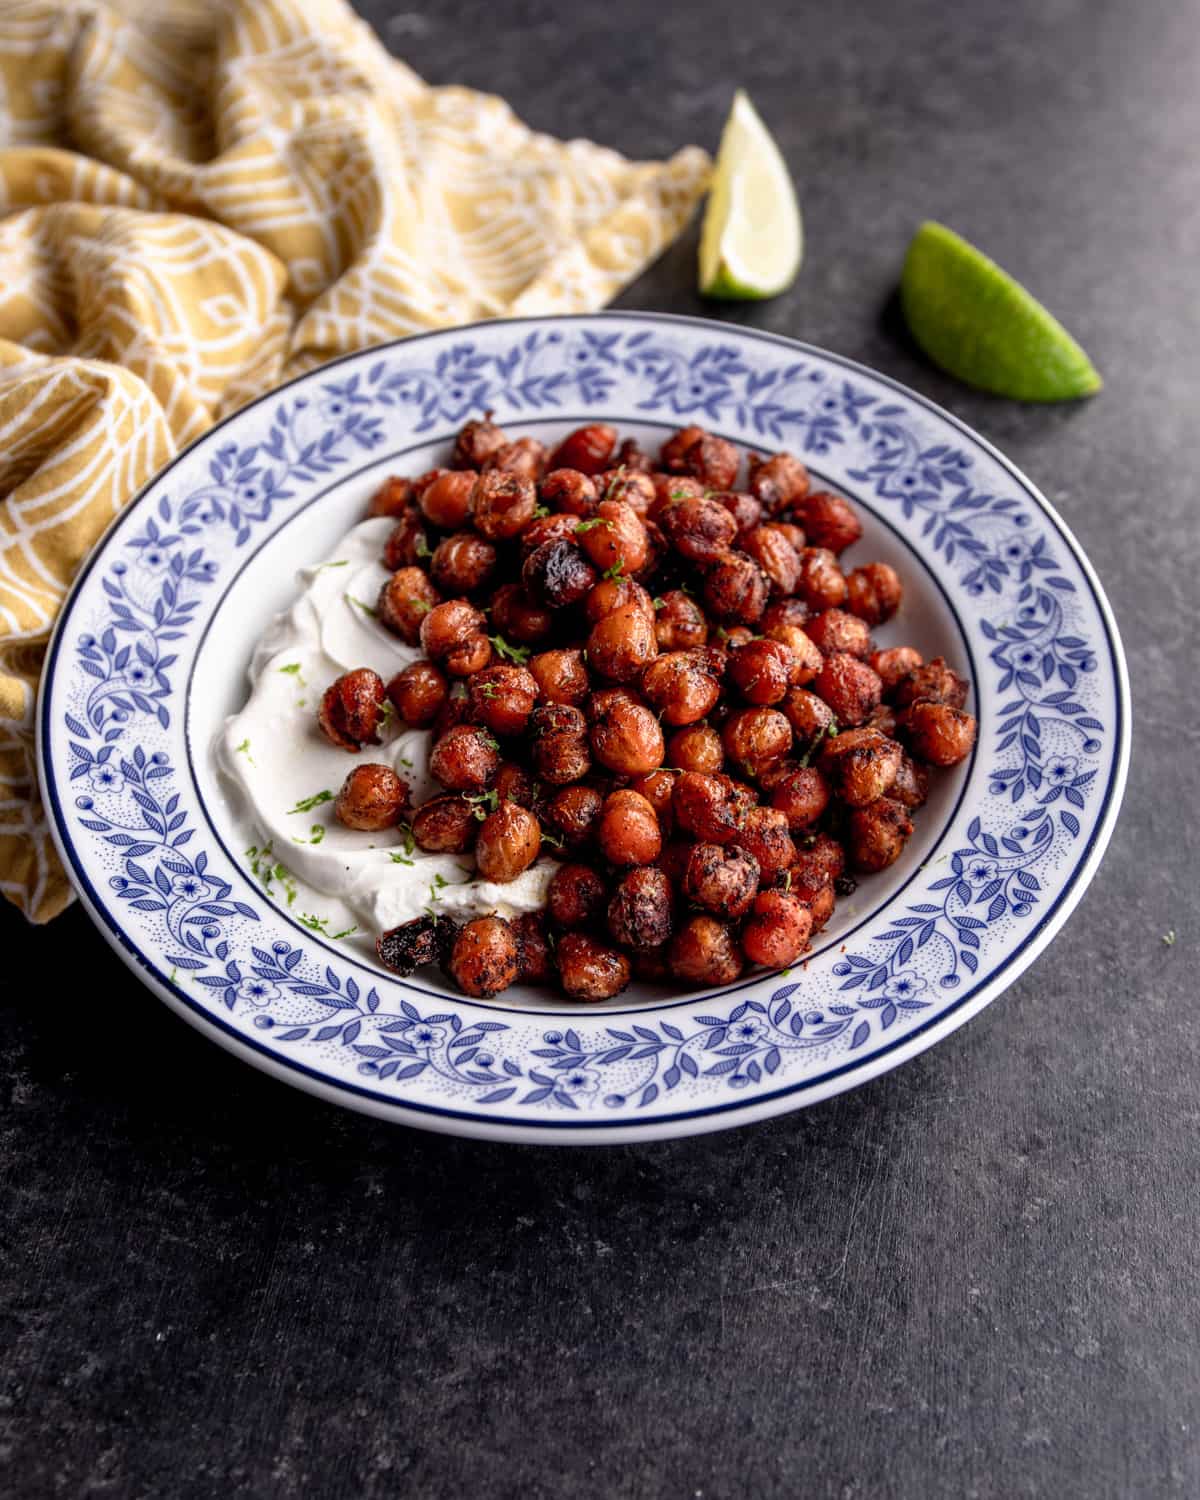 crispy chickpeas over plain yogurt in a blue and white bowl